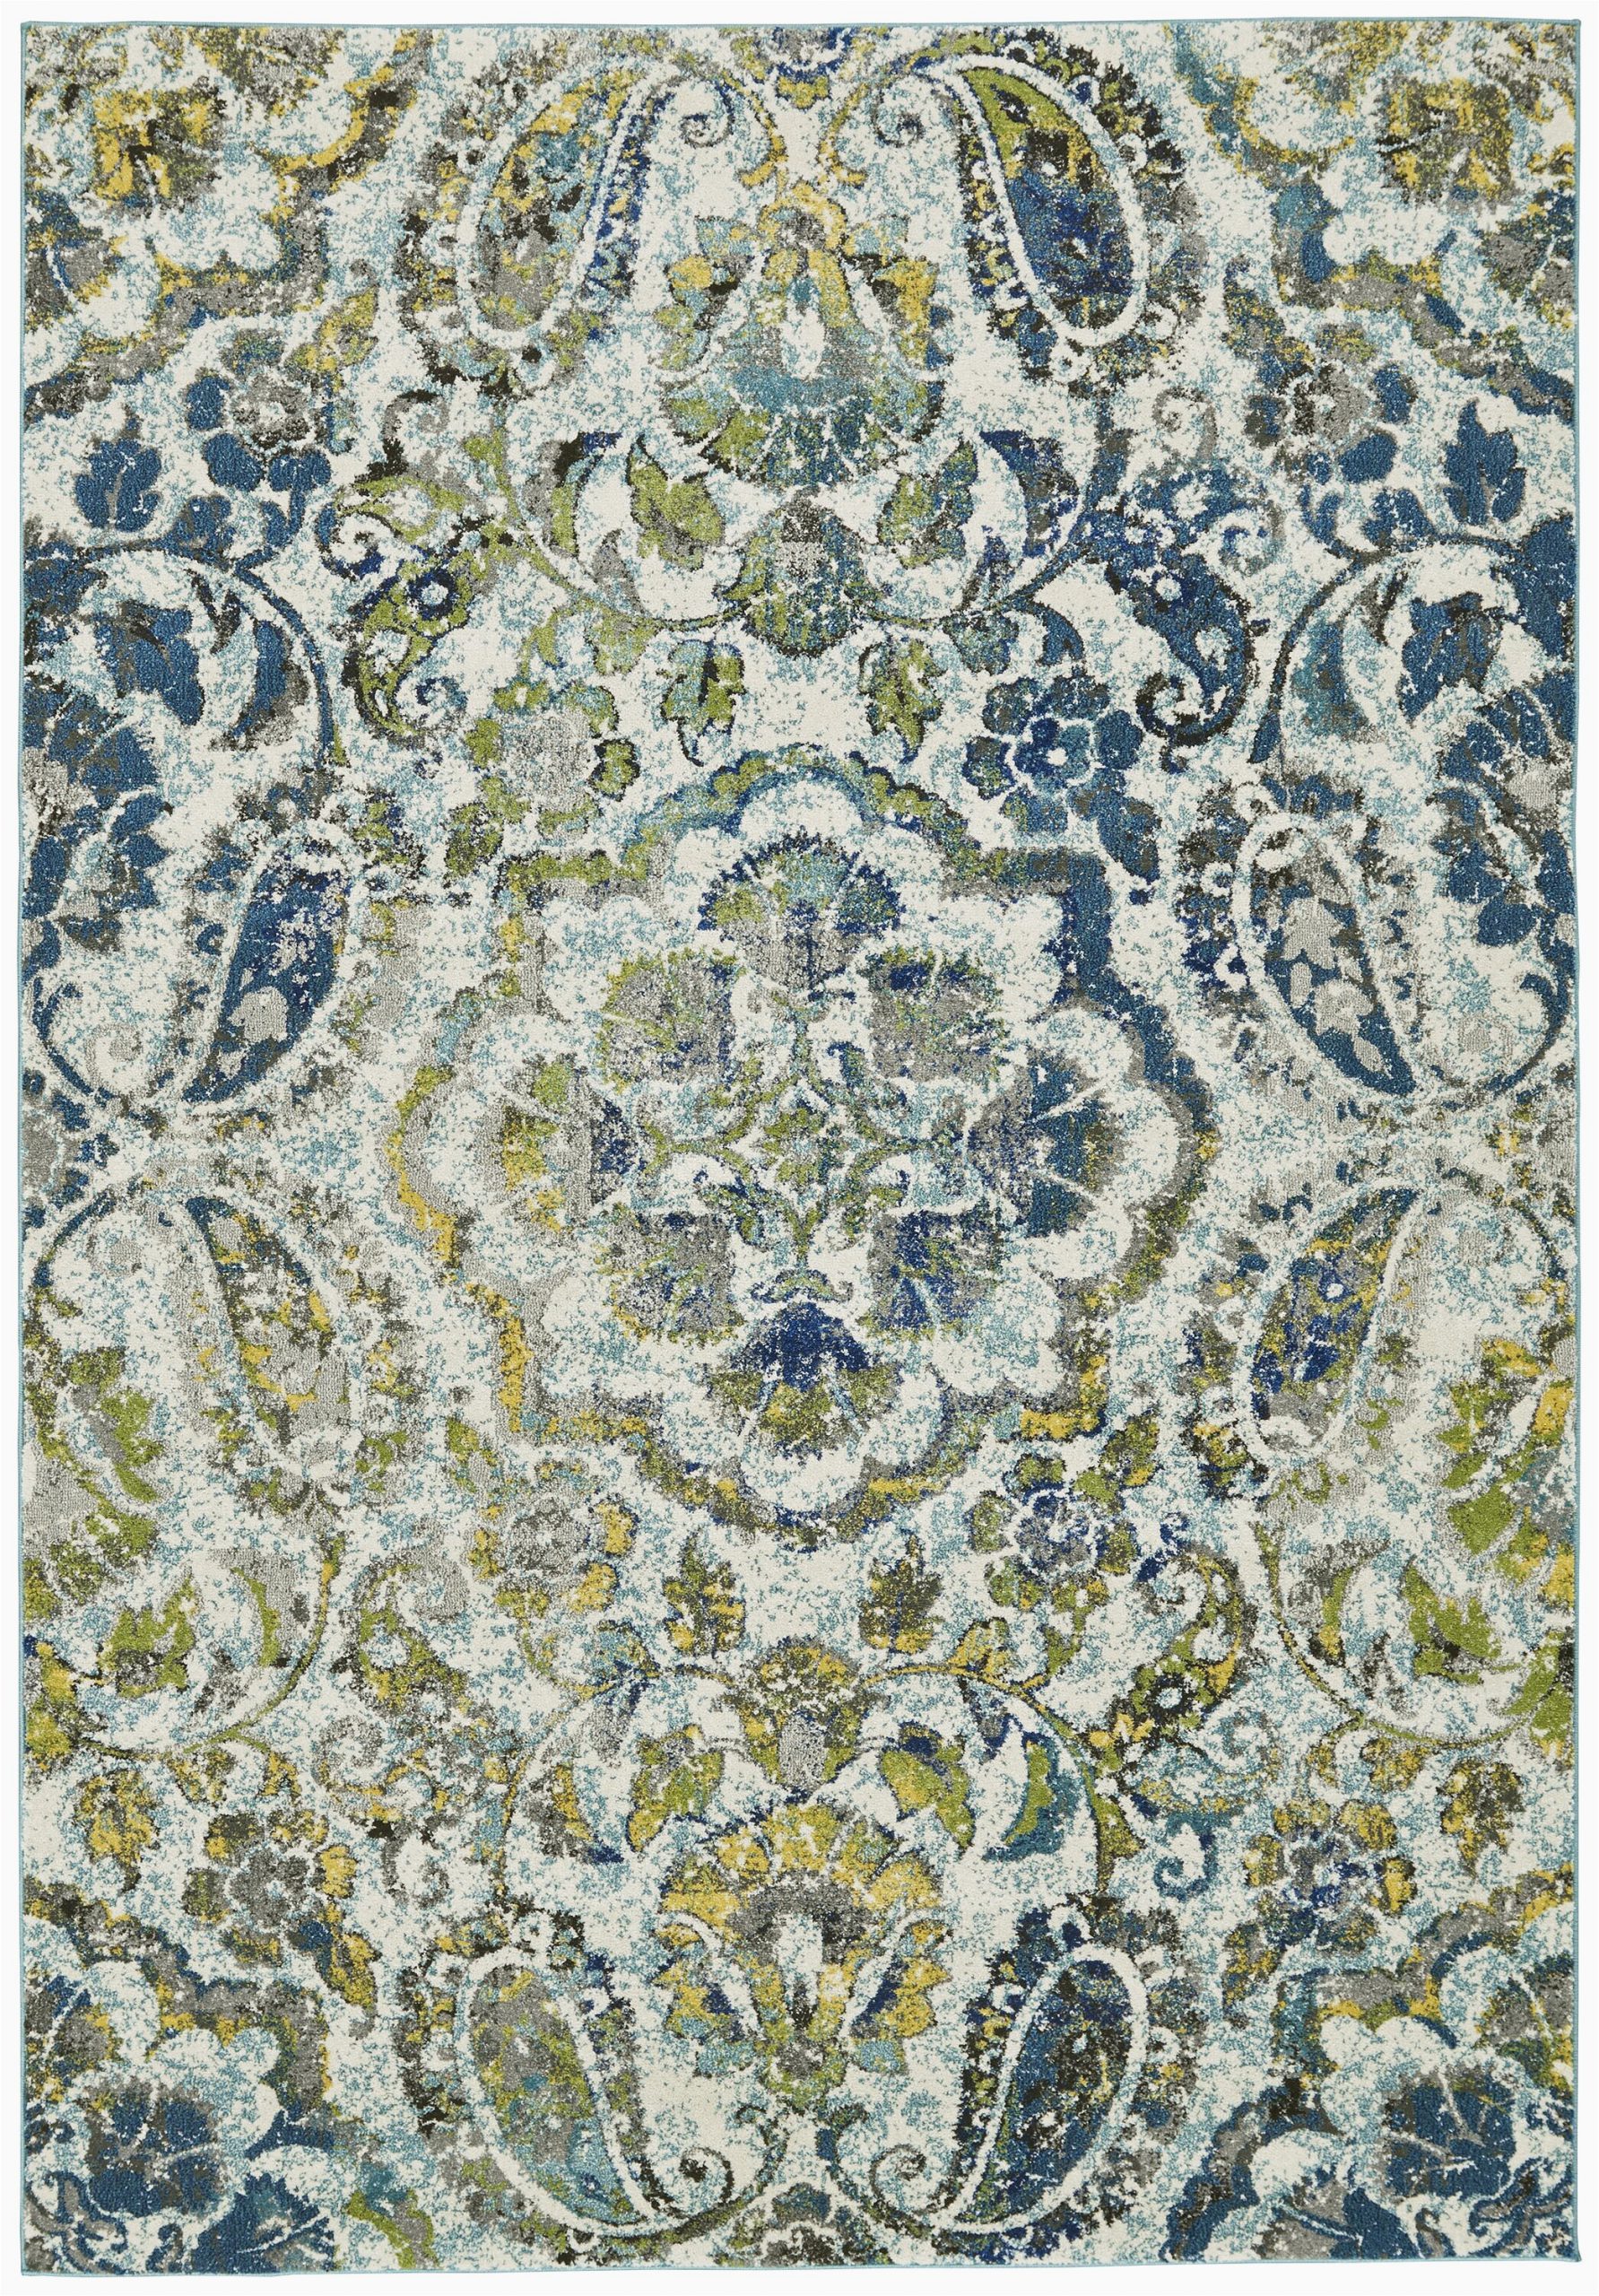 Maples Paisley Floral area Rug Anabranch Paisley Green Blue Yellow Cream area Rug